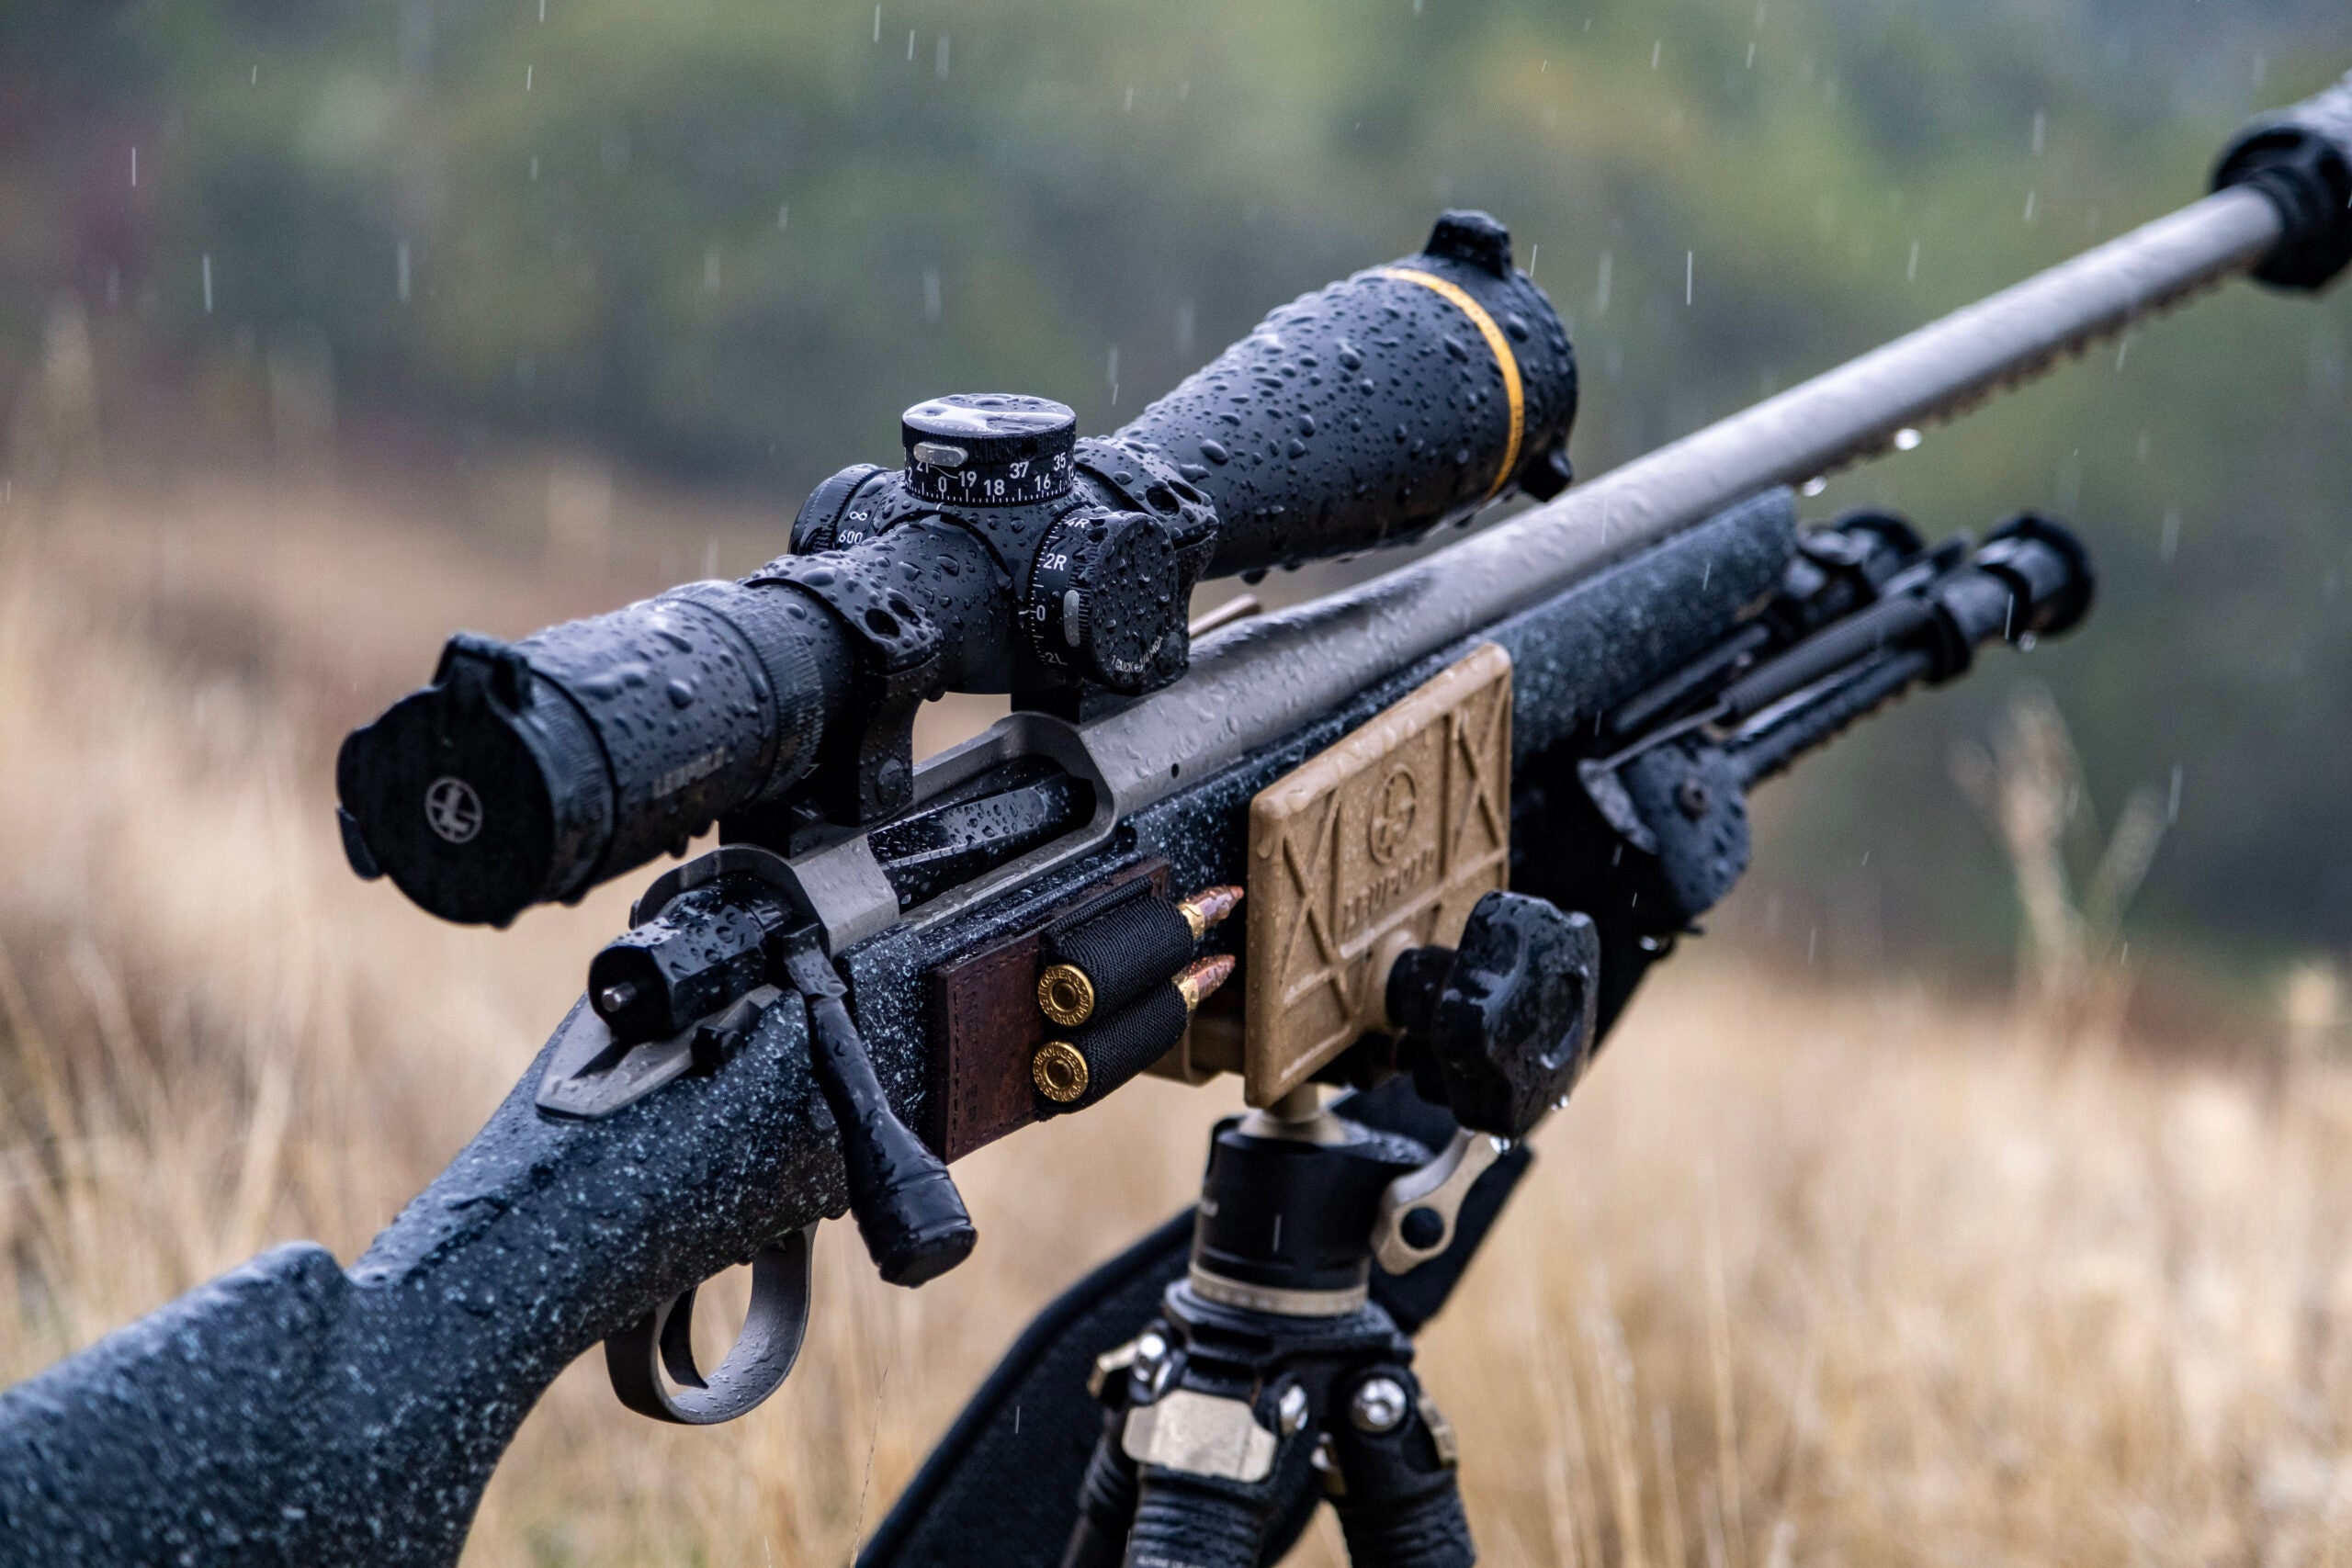 A Nosler Model 21 rifle with Leupold scope resting on a shooting tripod